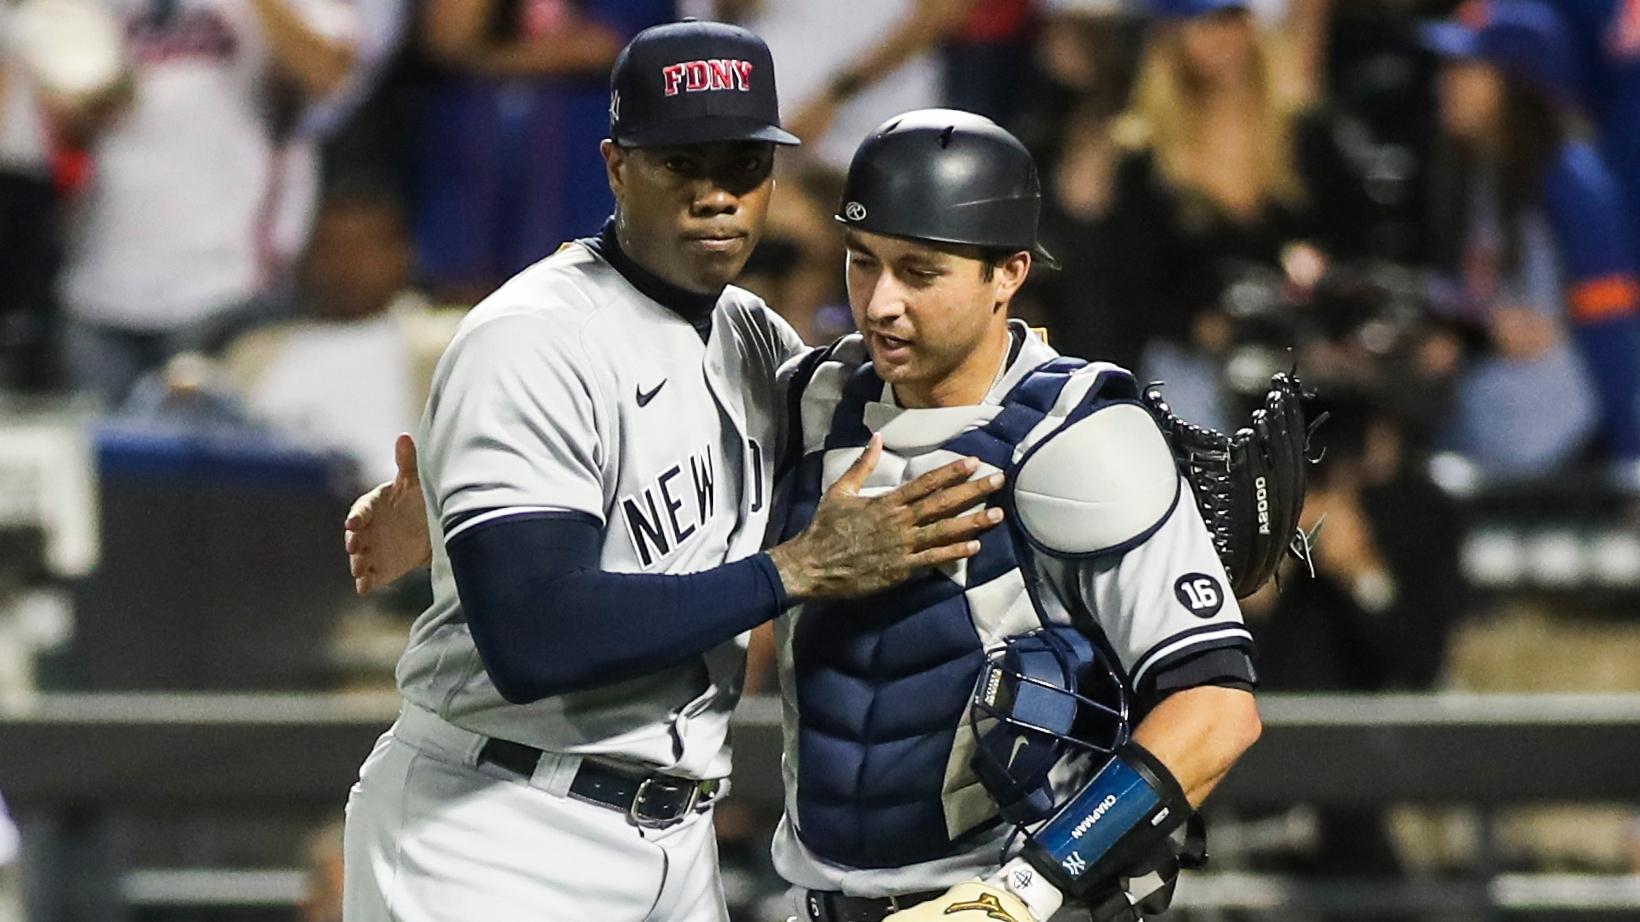 Sep 11, 2021; New York City, New York, USA; New York Yankees pitcher Aroldis Chapman (54) and catcher Kyle Higashioka (66) celebrate after defeating the New York Mets 8-7 at Citi Field. / Wendell Cruz-USA TODAY Sports